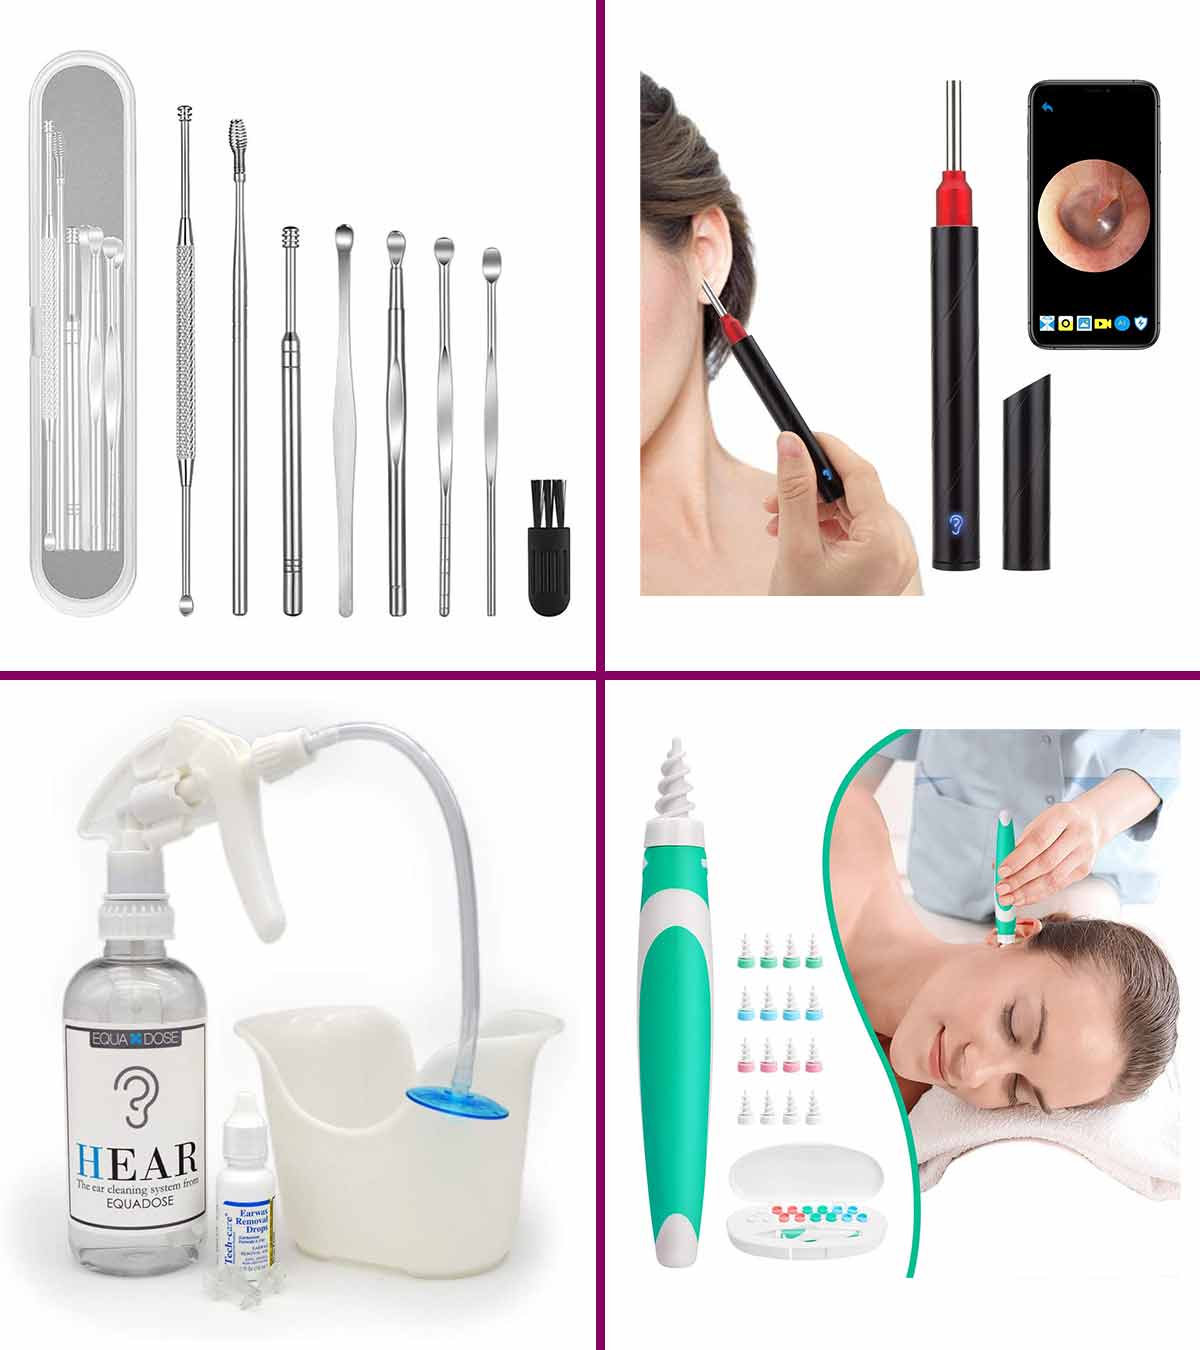 13 Best Earwax Removal Kits To Buy In 2023 For Safe Cleaning